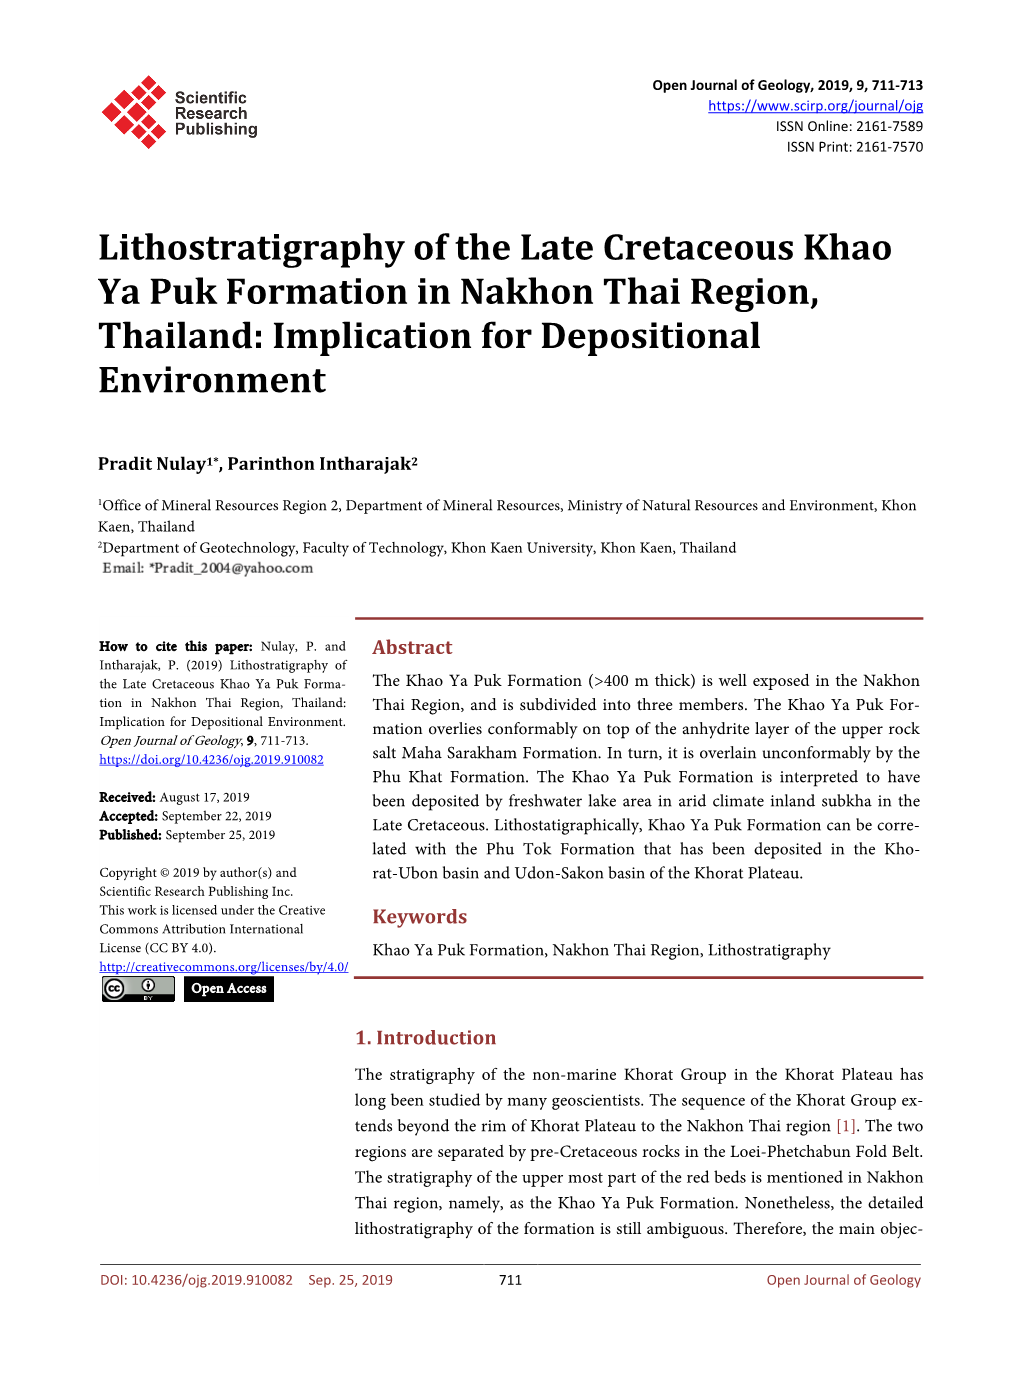 Lithostratigraphy of the Late Cretaceous Khao Ya Puk Formation in Nakhon Thai Region, Thailand: Implication for Depositional Environment